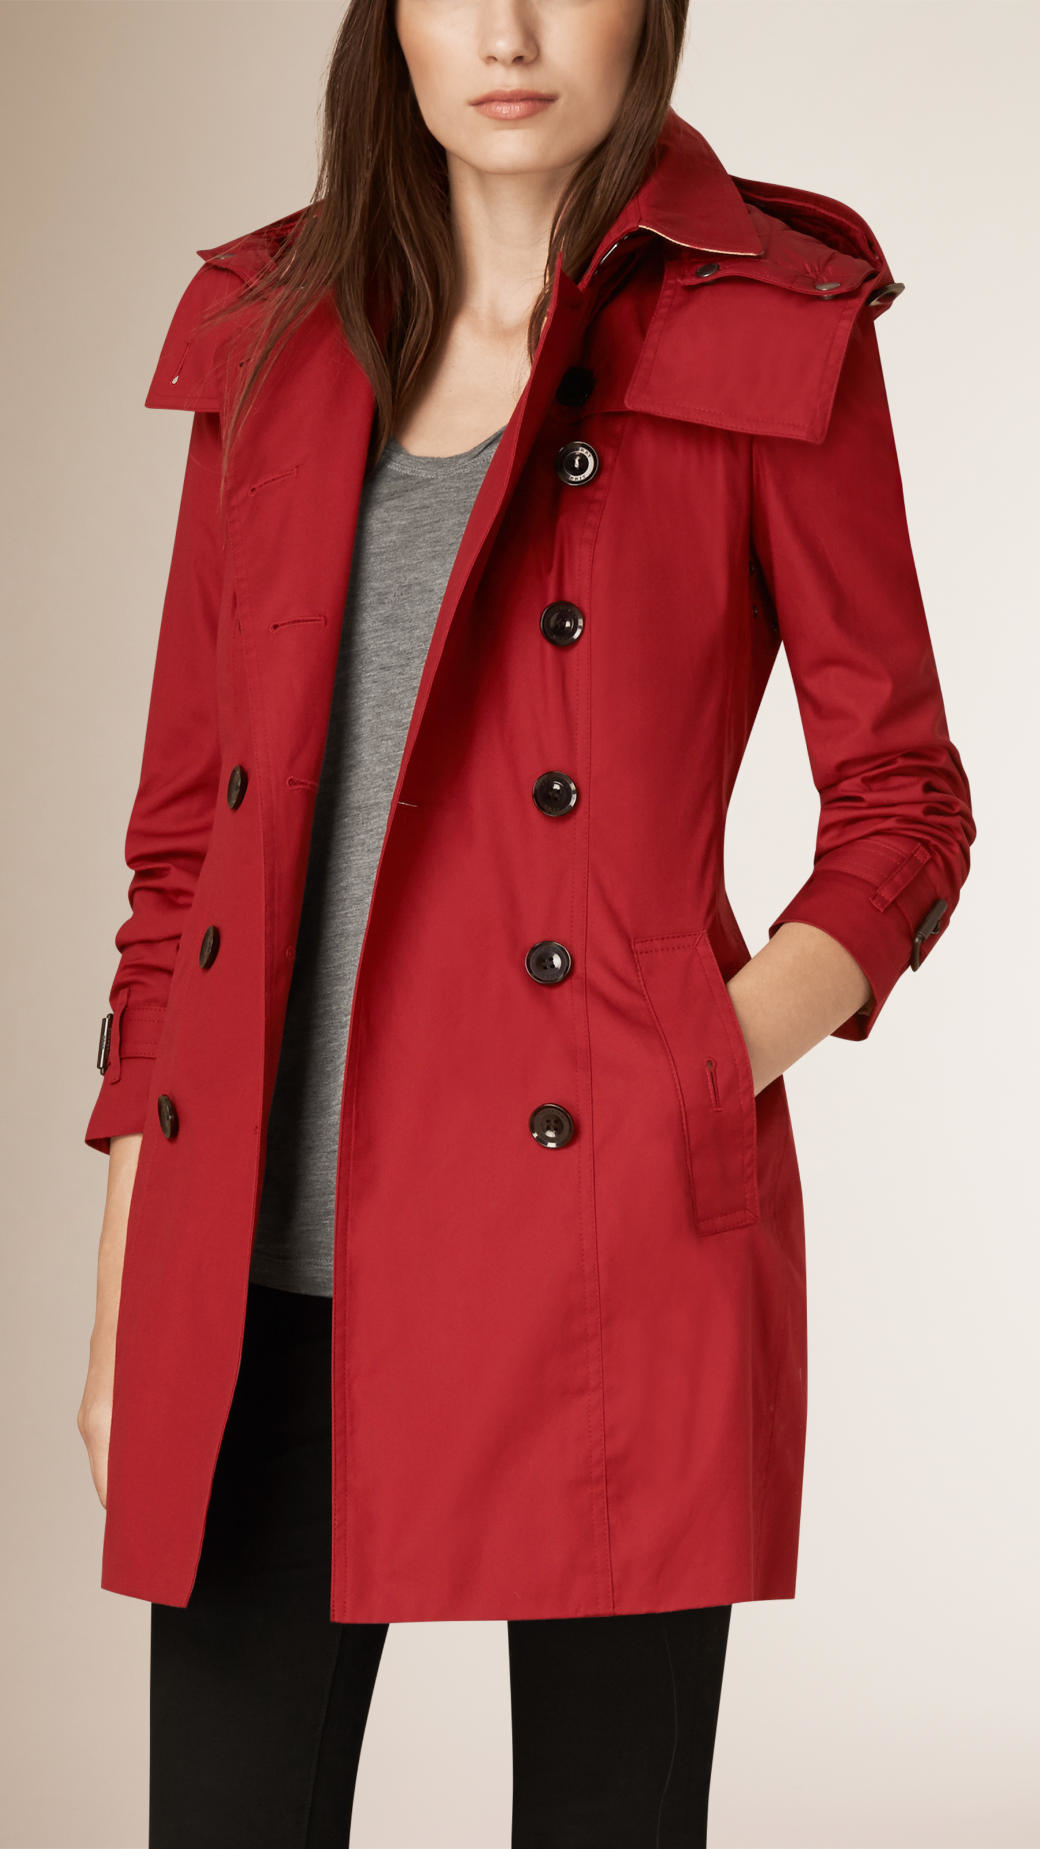 Burberry Hooded Cotton Trench Coat With Warmer in Damson (Red) -